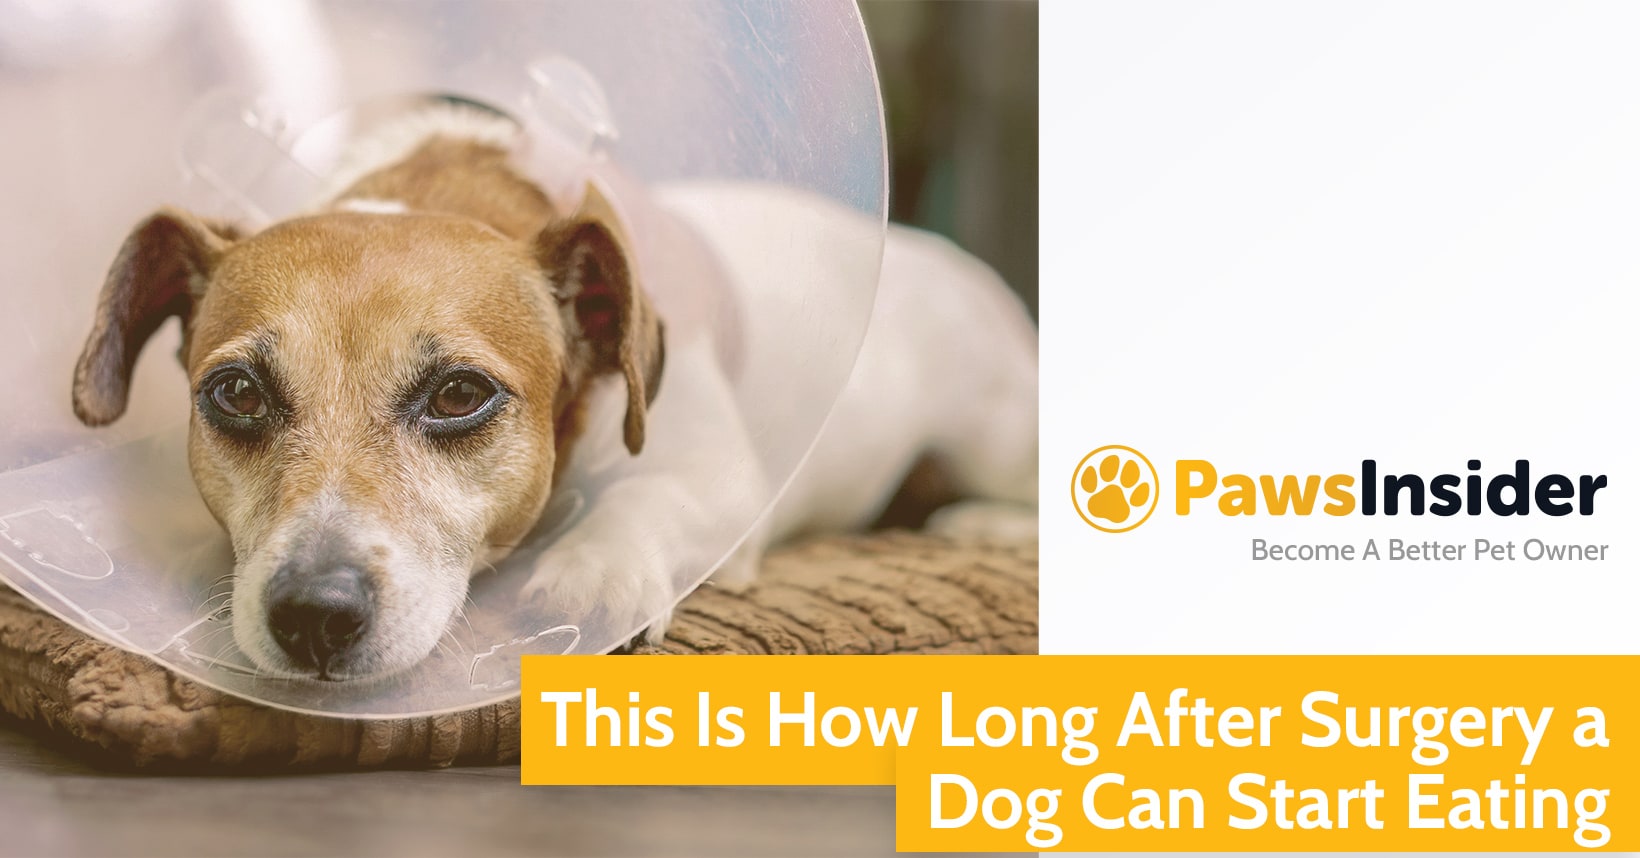 can a dog eat after surgery